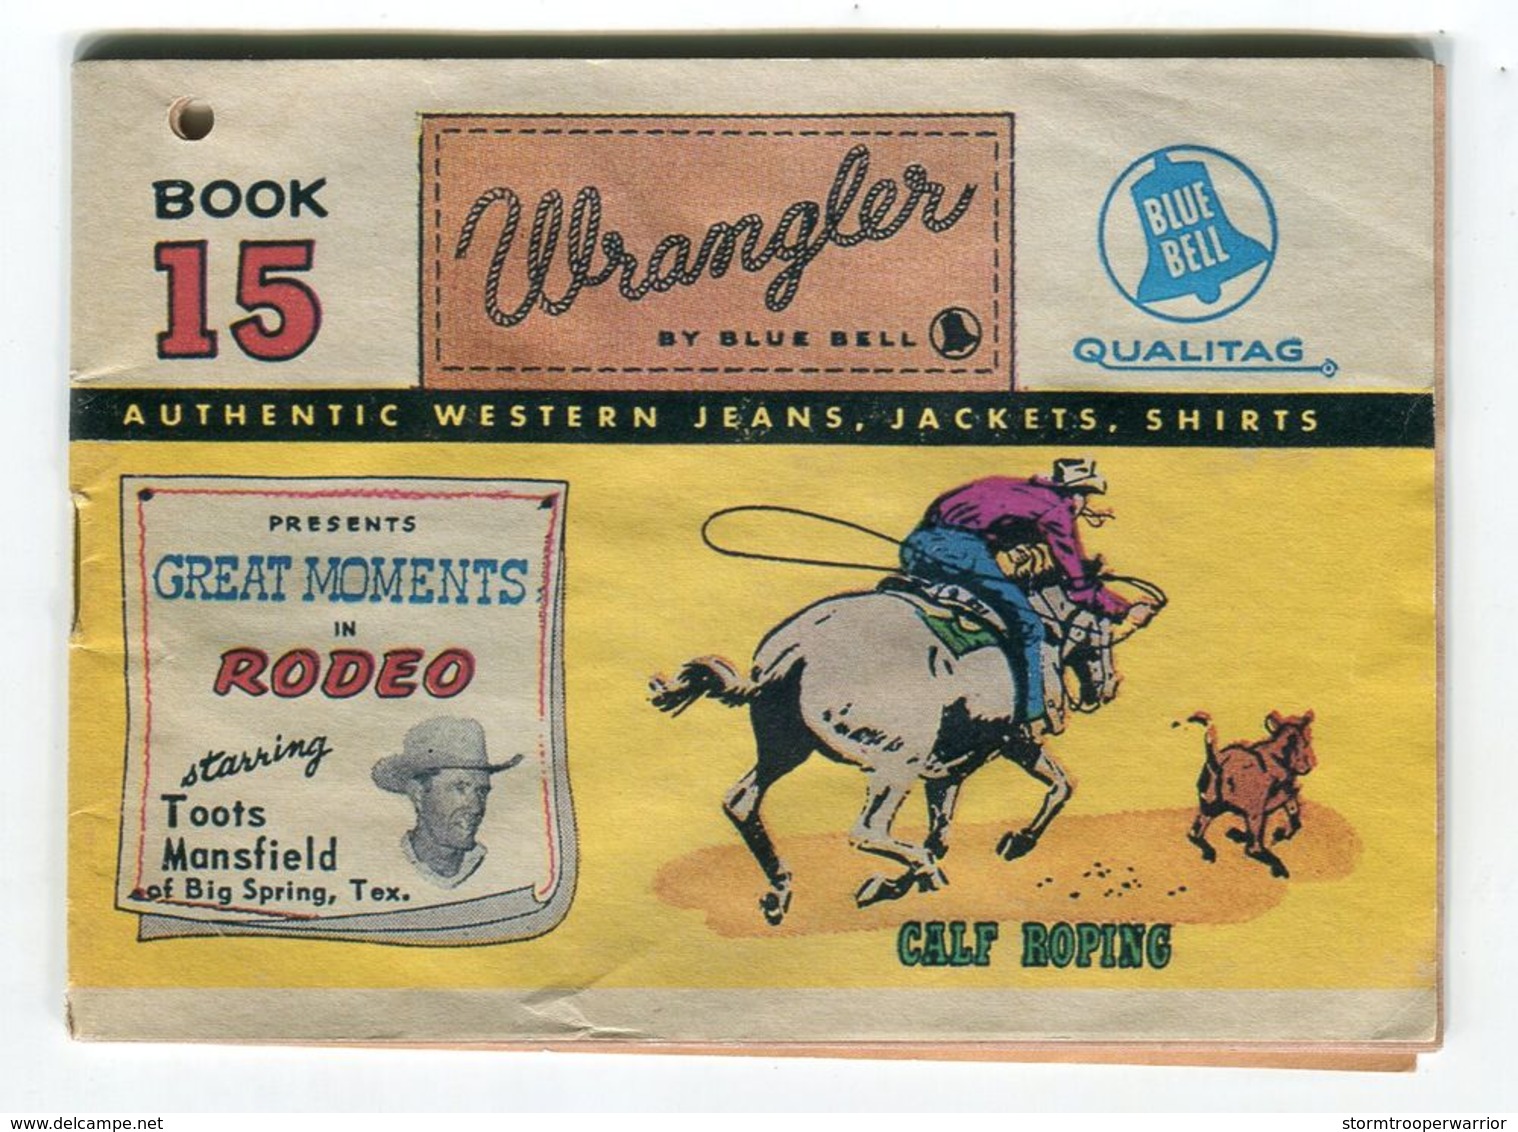 USA - WRANGLER RODEO SERIES By Blue Bell - N°15 -  STARRING Toots Mansfield - Andere Verleger